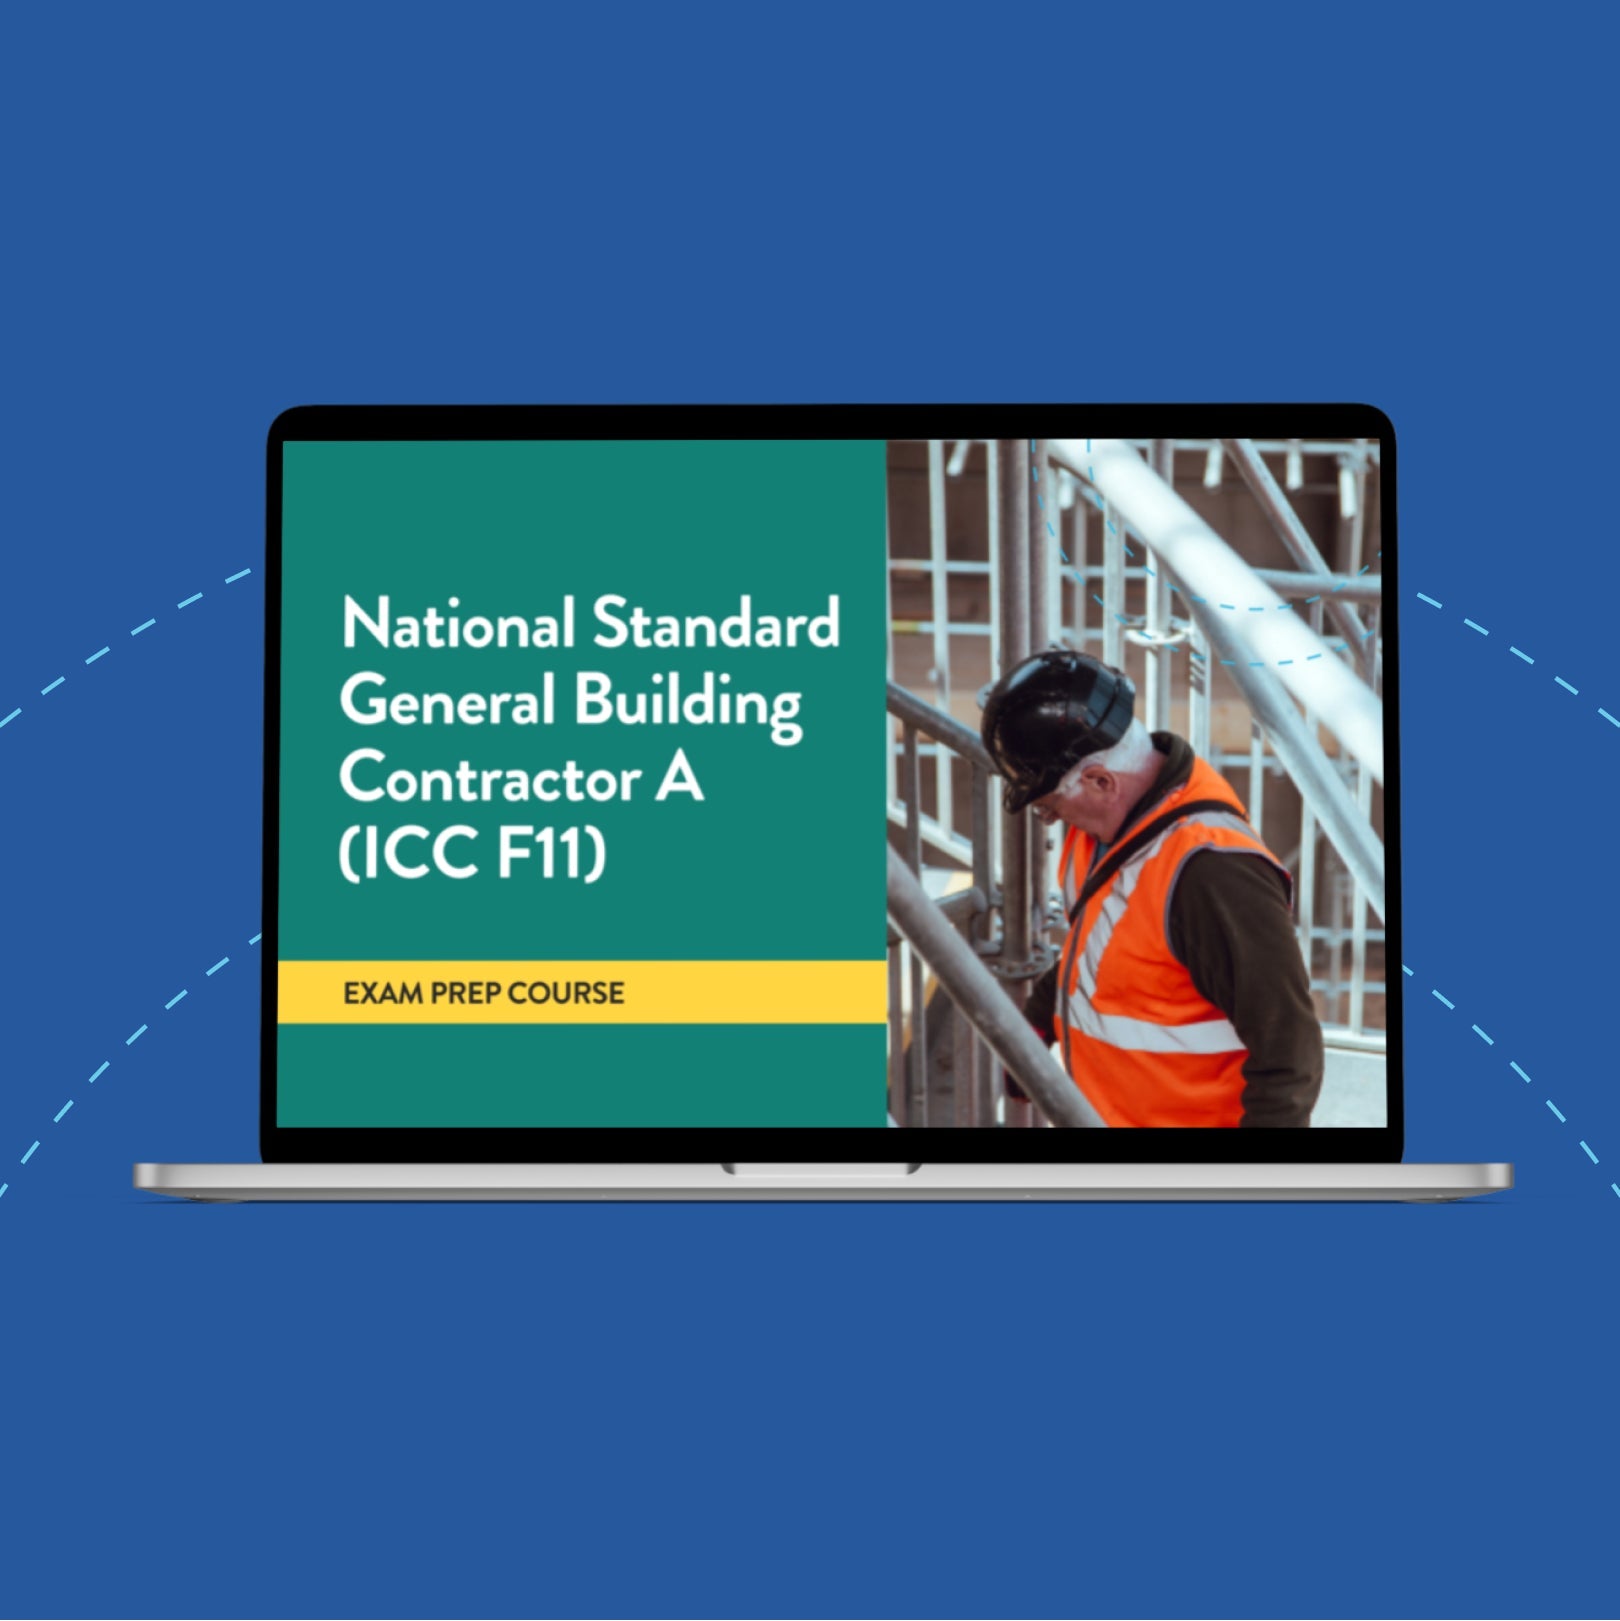 National Standard General Building Contractor A (ICC F11) Exam Prep Course